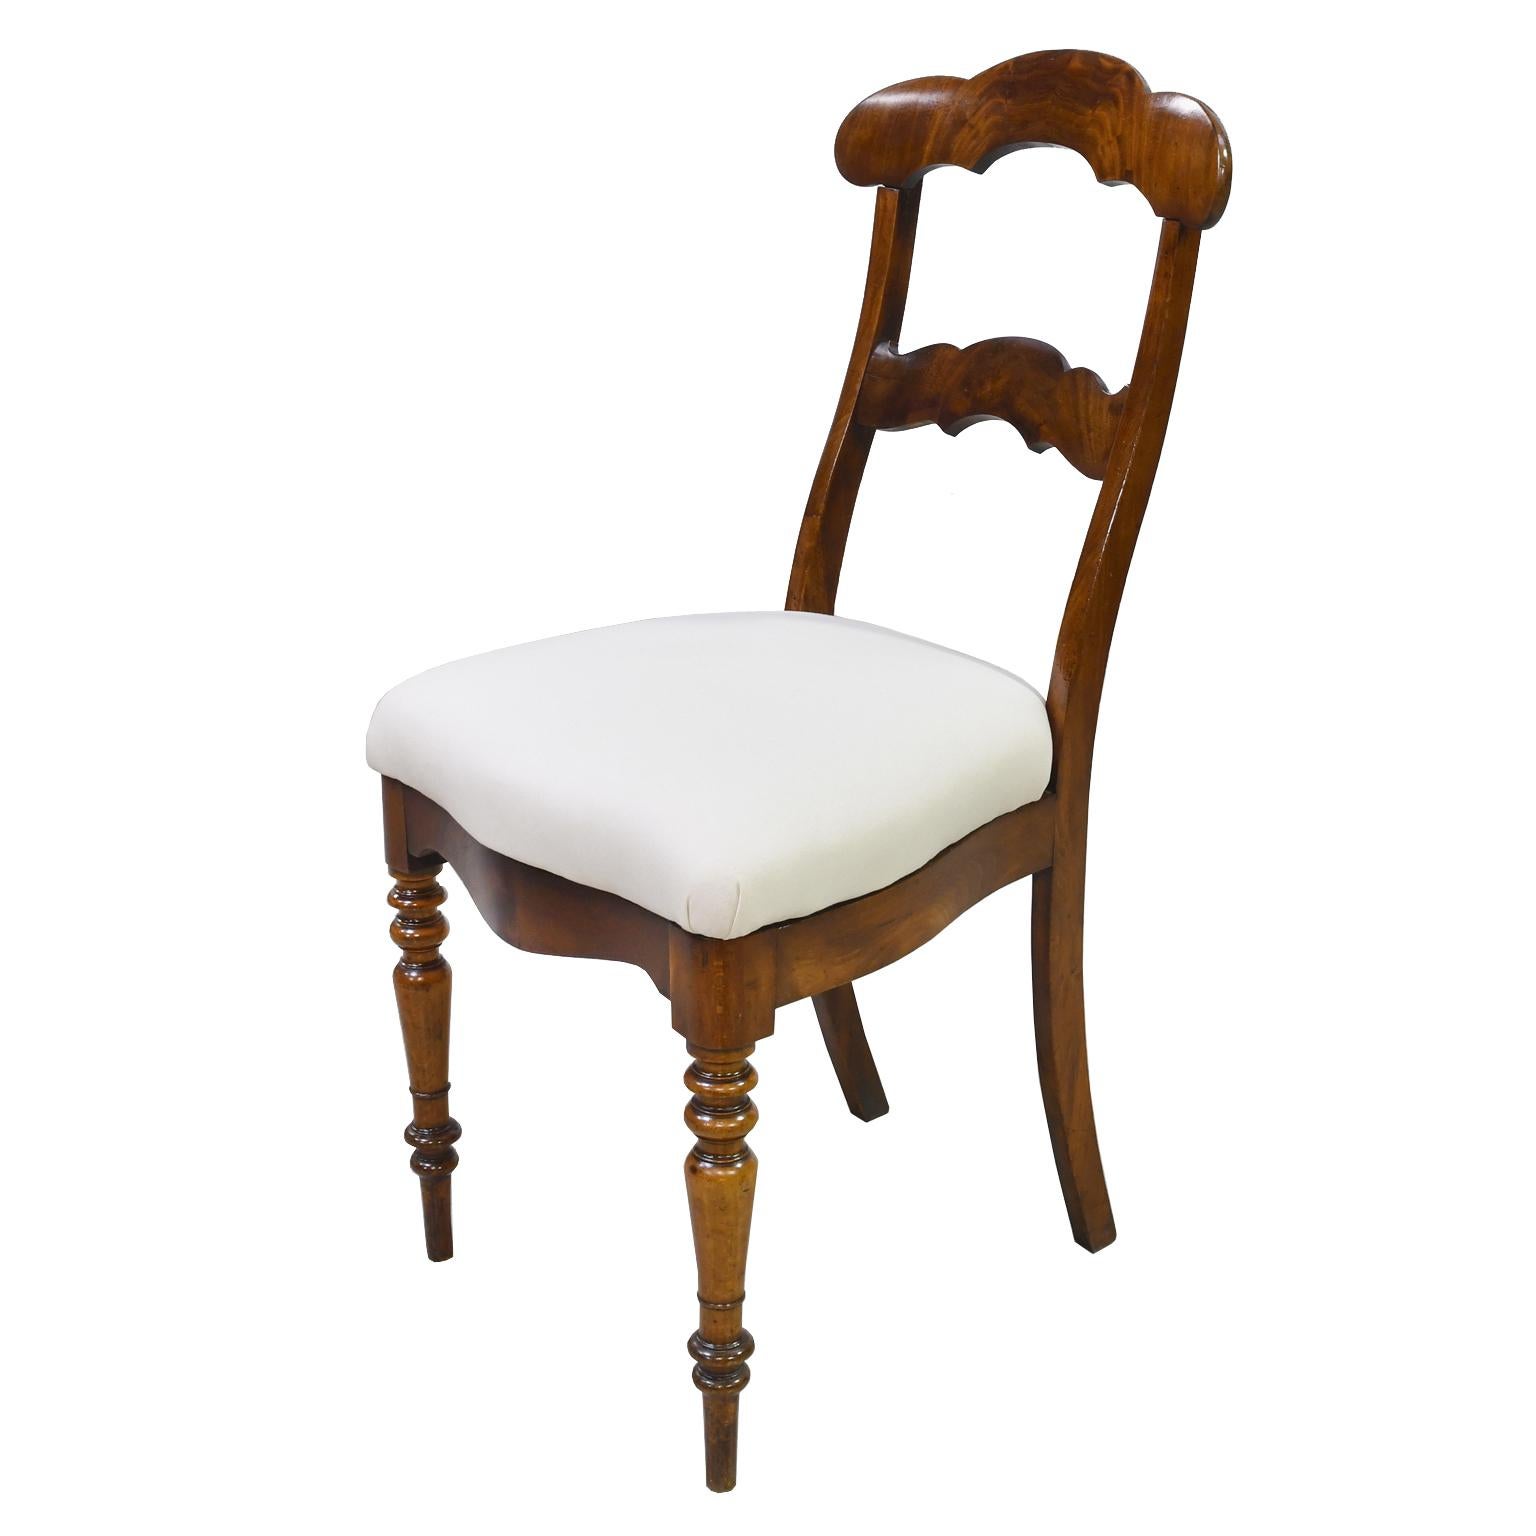 A set of 4 Biedermeier dining chairs in West Indies mahogany with upholstered slip seat. Back is high and has two cross rails with scrolled arches featuring a beautiful crotch mahogany. Seat has a serpentine front and sides with inverted arches on